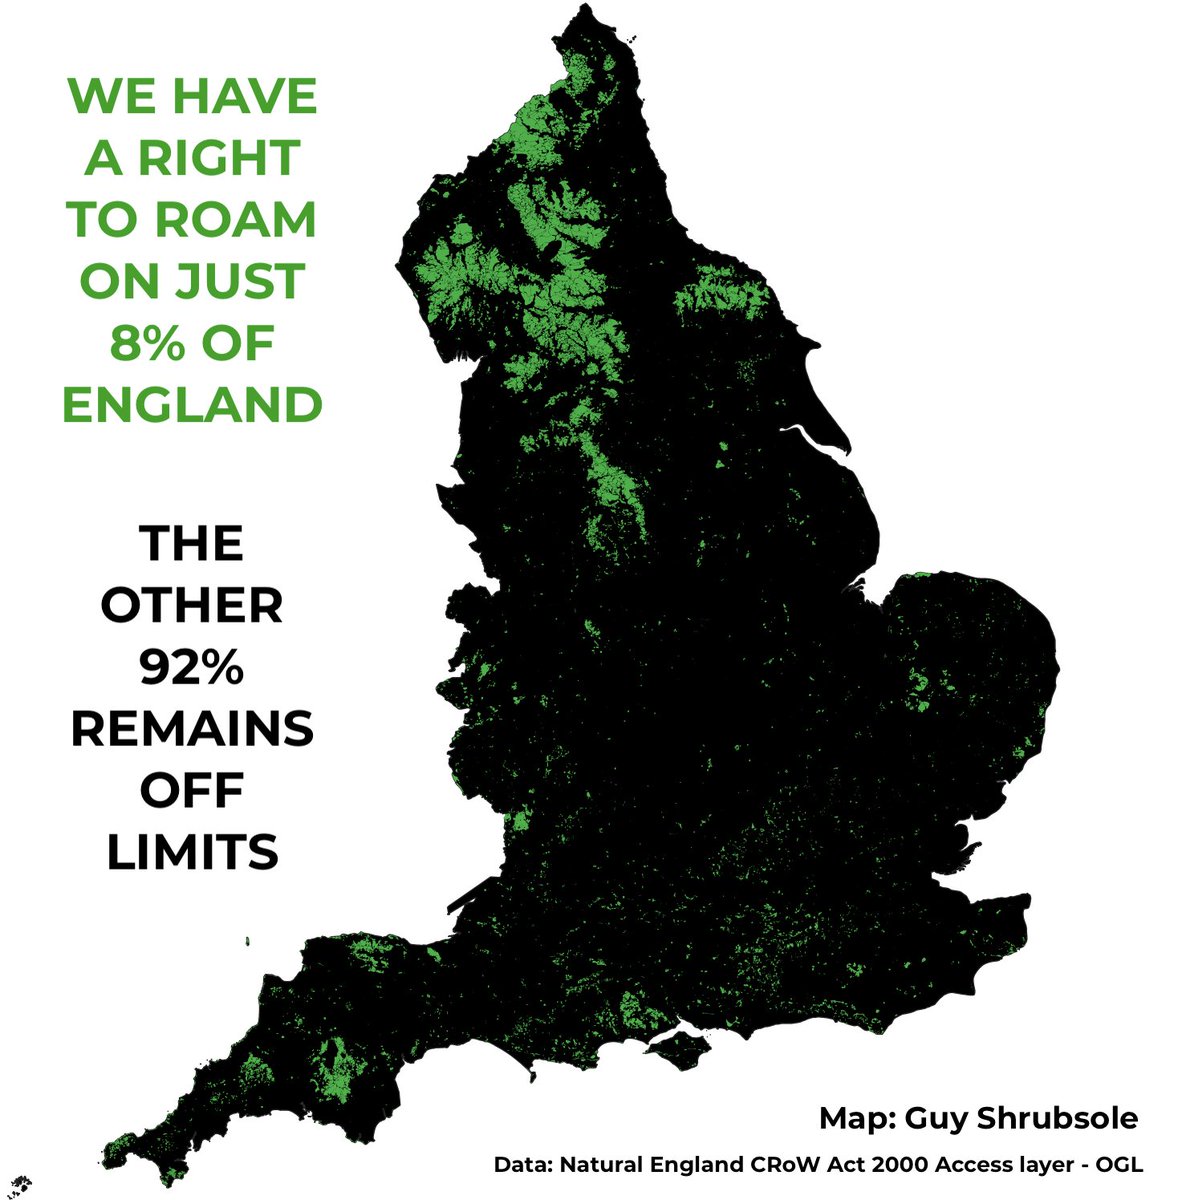 People are rightfully furious that wild camping on 70k acres of Dartmoor has been banned, but that was just 0.2% of England. Wait till they find out we're banned from 92% of ALL England while Scotland has a national #RightToRoam! Join the movement: righttoroam.org.uk